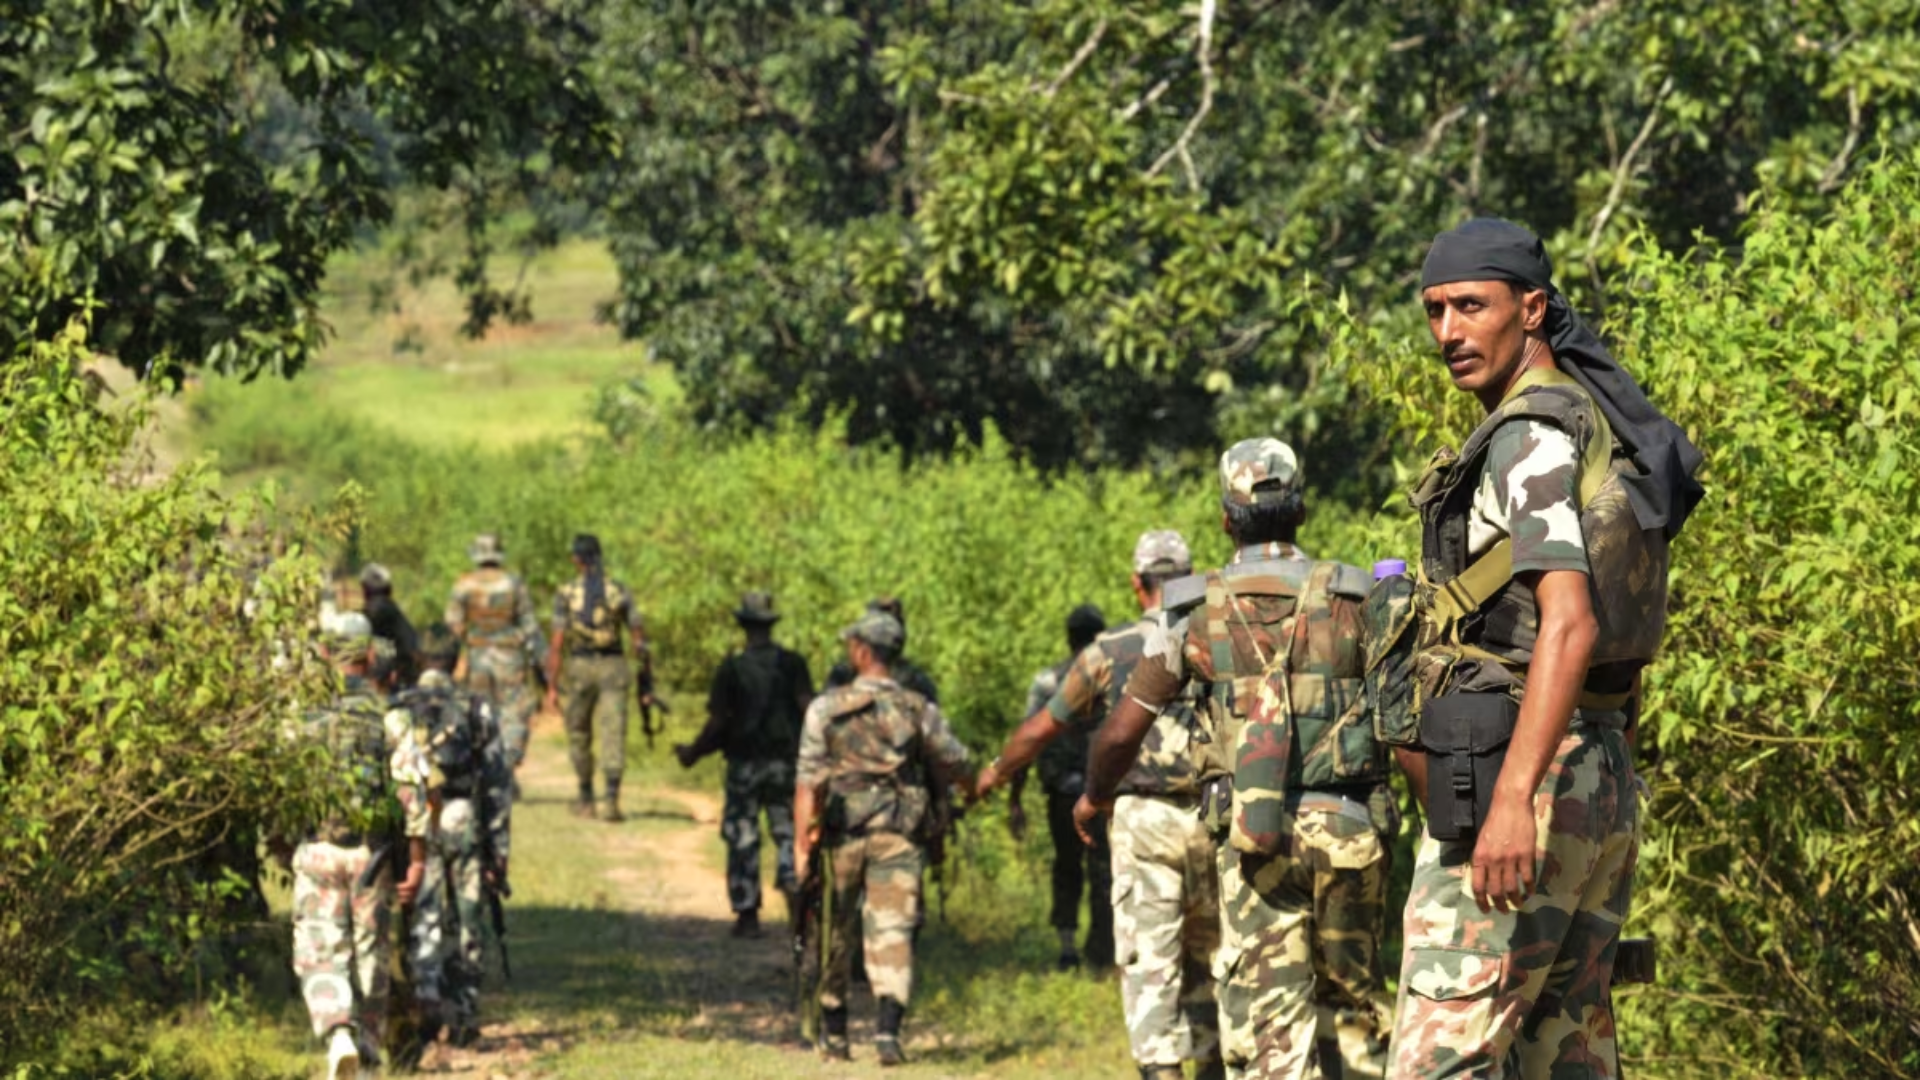 18 Naxals Killed, 3 Security Personnel Injured in Kanker Encounter